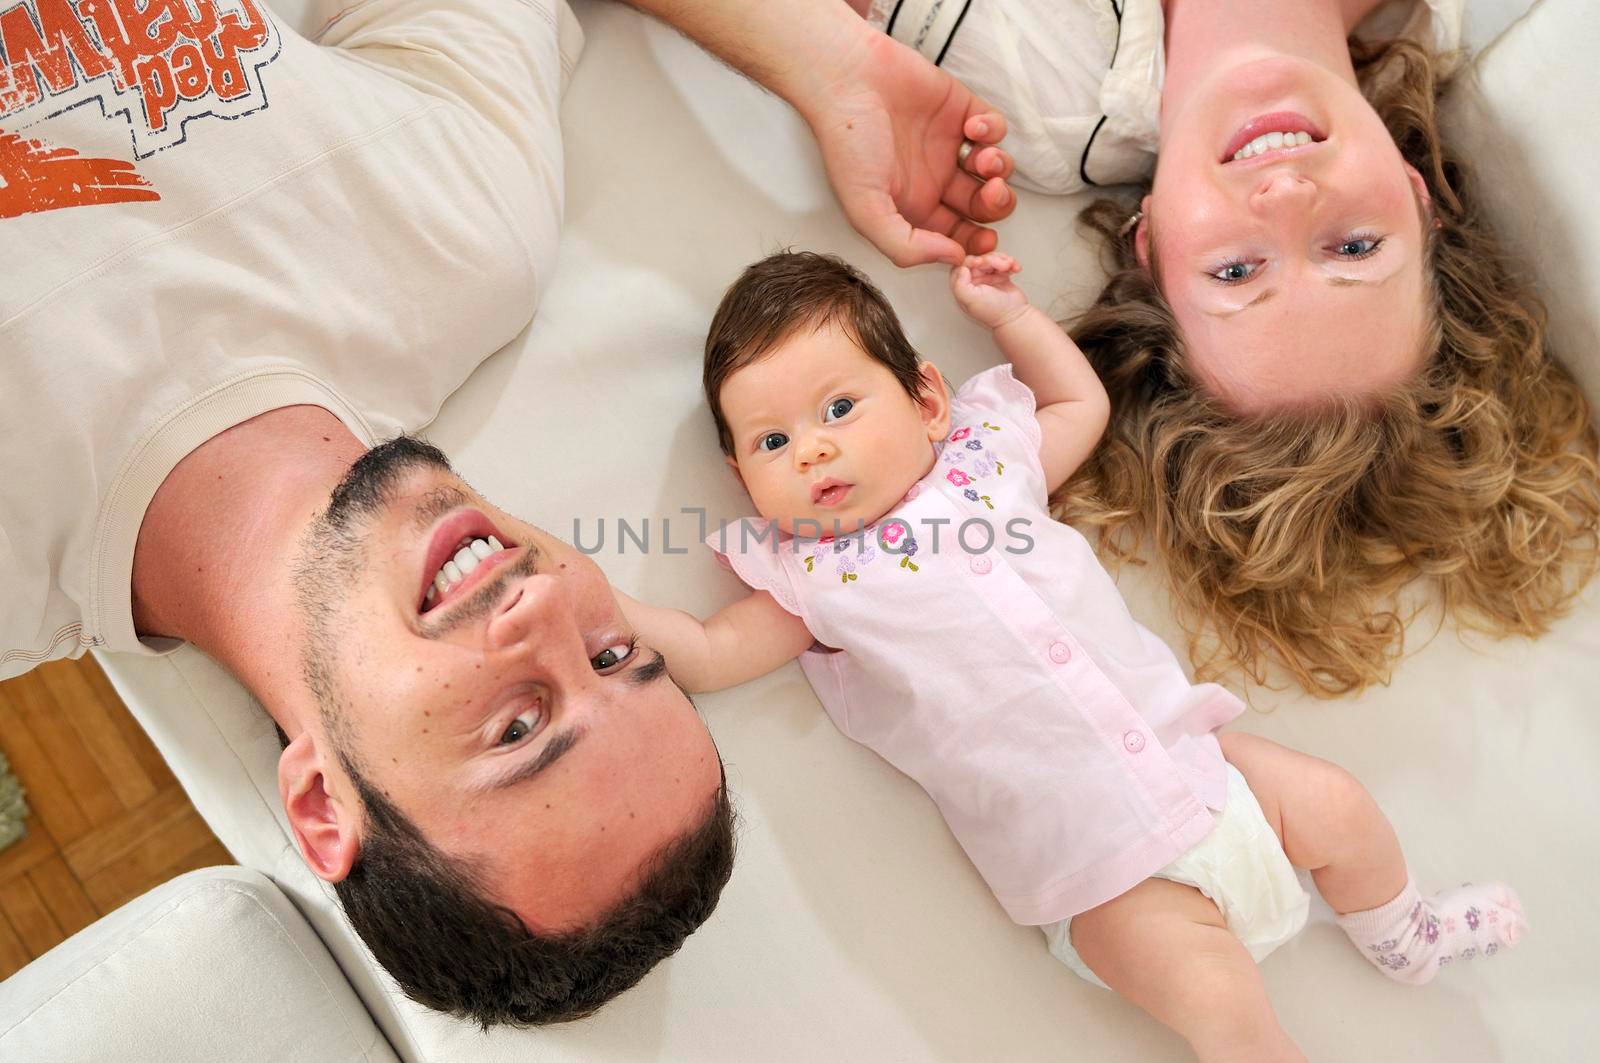 indoor portrait with happy young family and  cute little babby  by dotshock